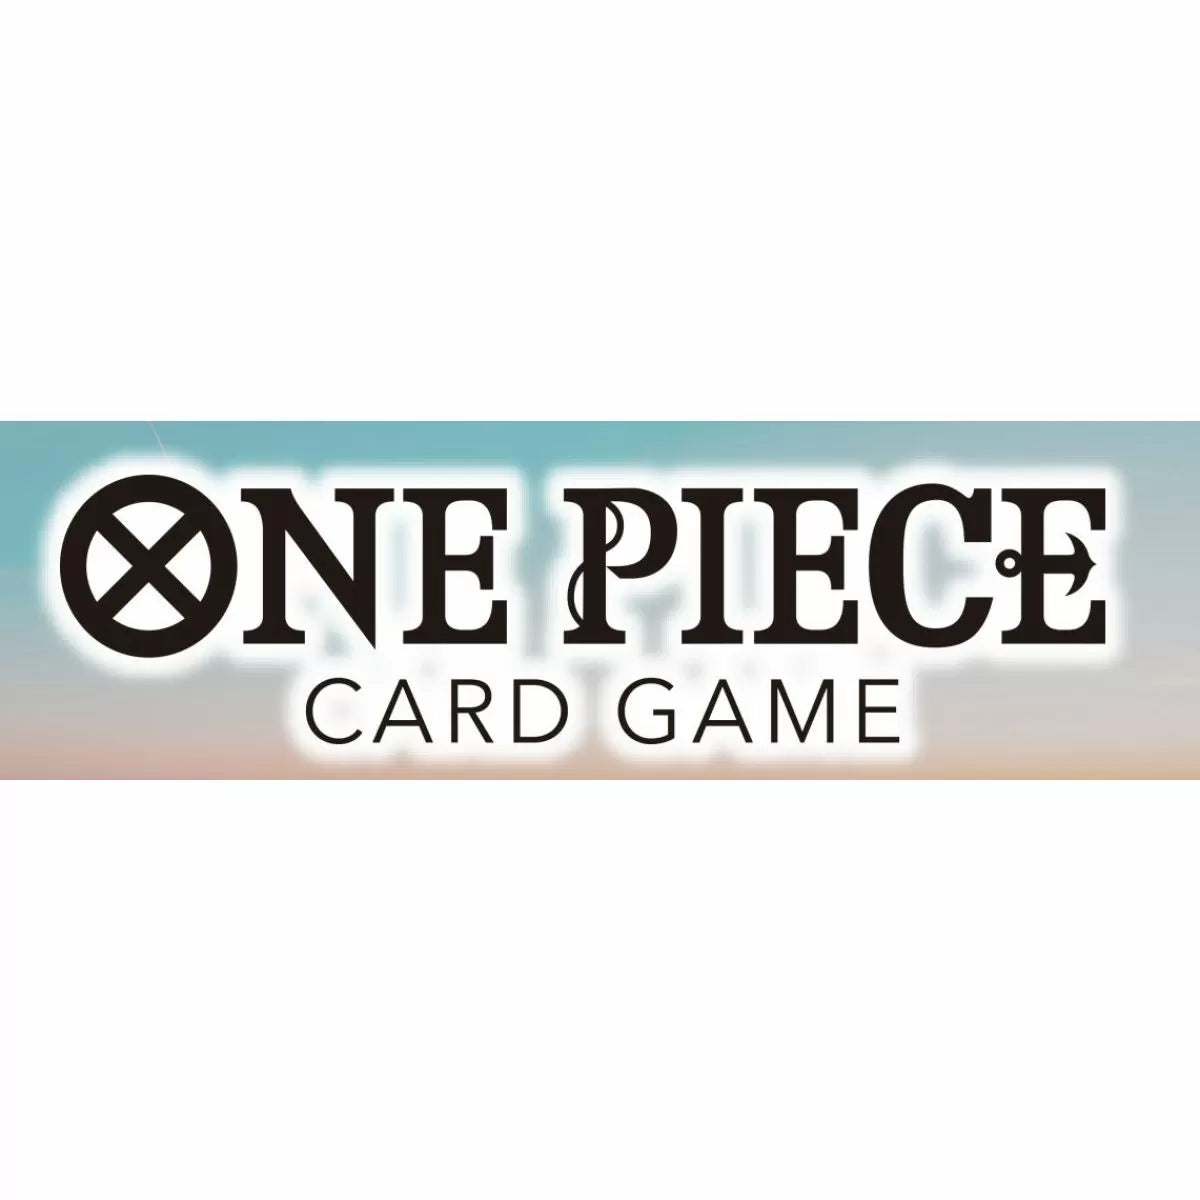 One Piece Card Game Kingdoms of Intrigue (OP-04) Booster Box